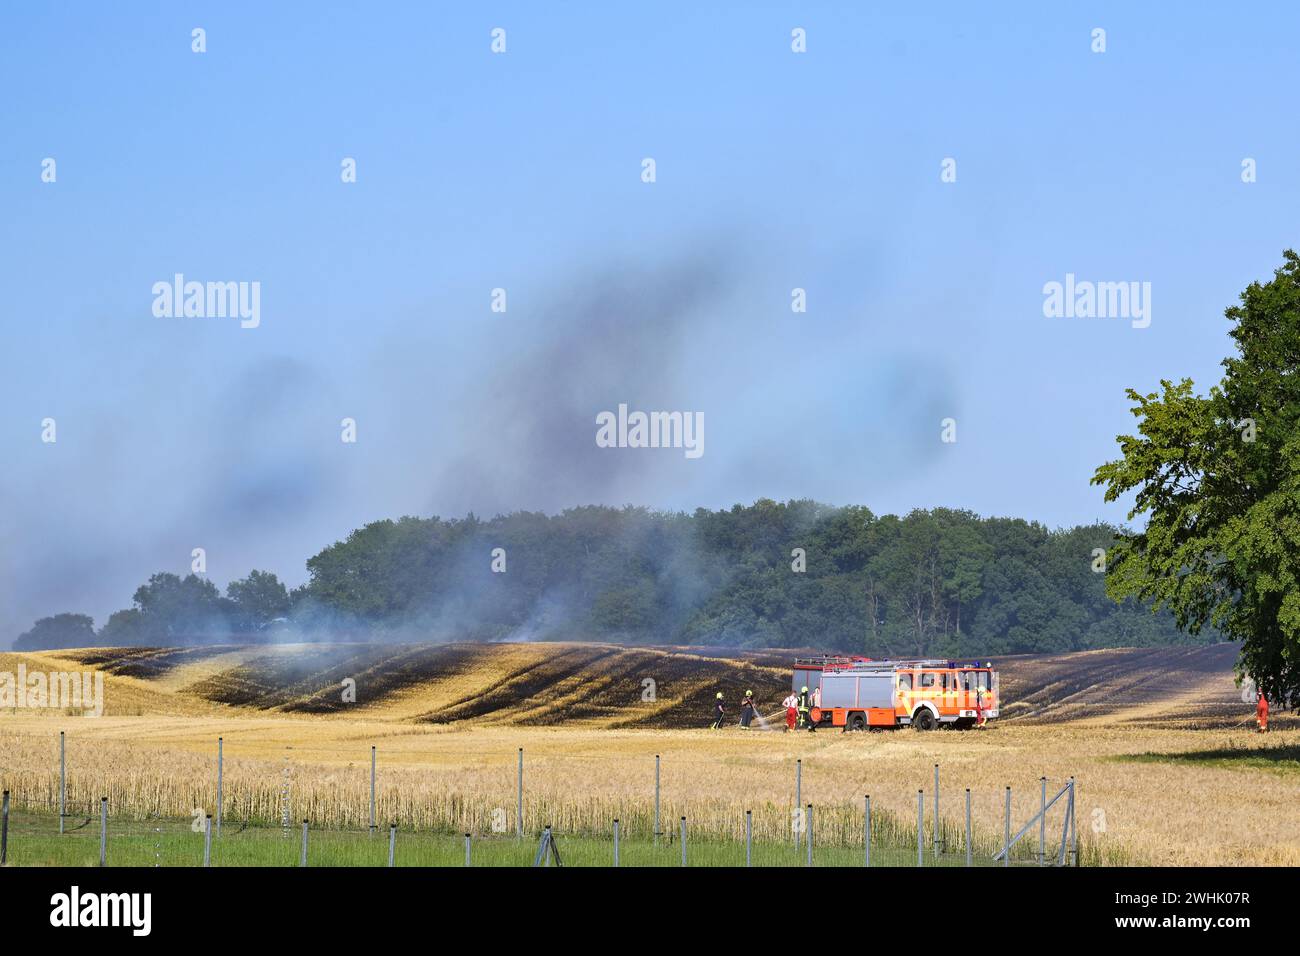 Fire engine and firefighters damping down a field fire to protect the surrounding area in a rural landscape, copy space Stock Photo